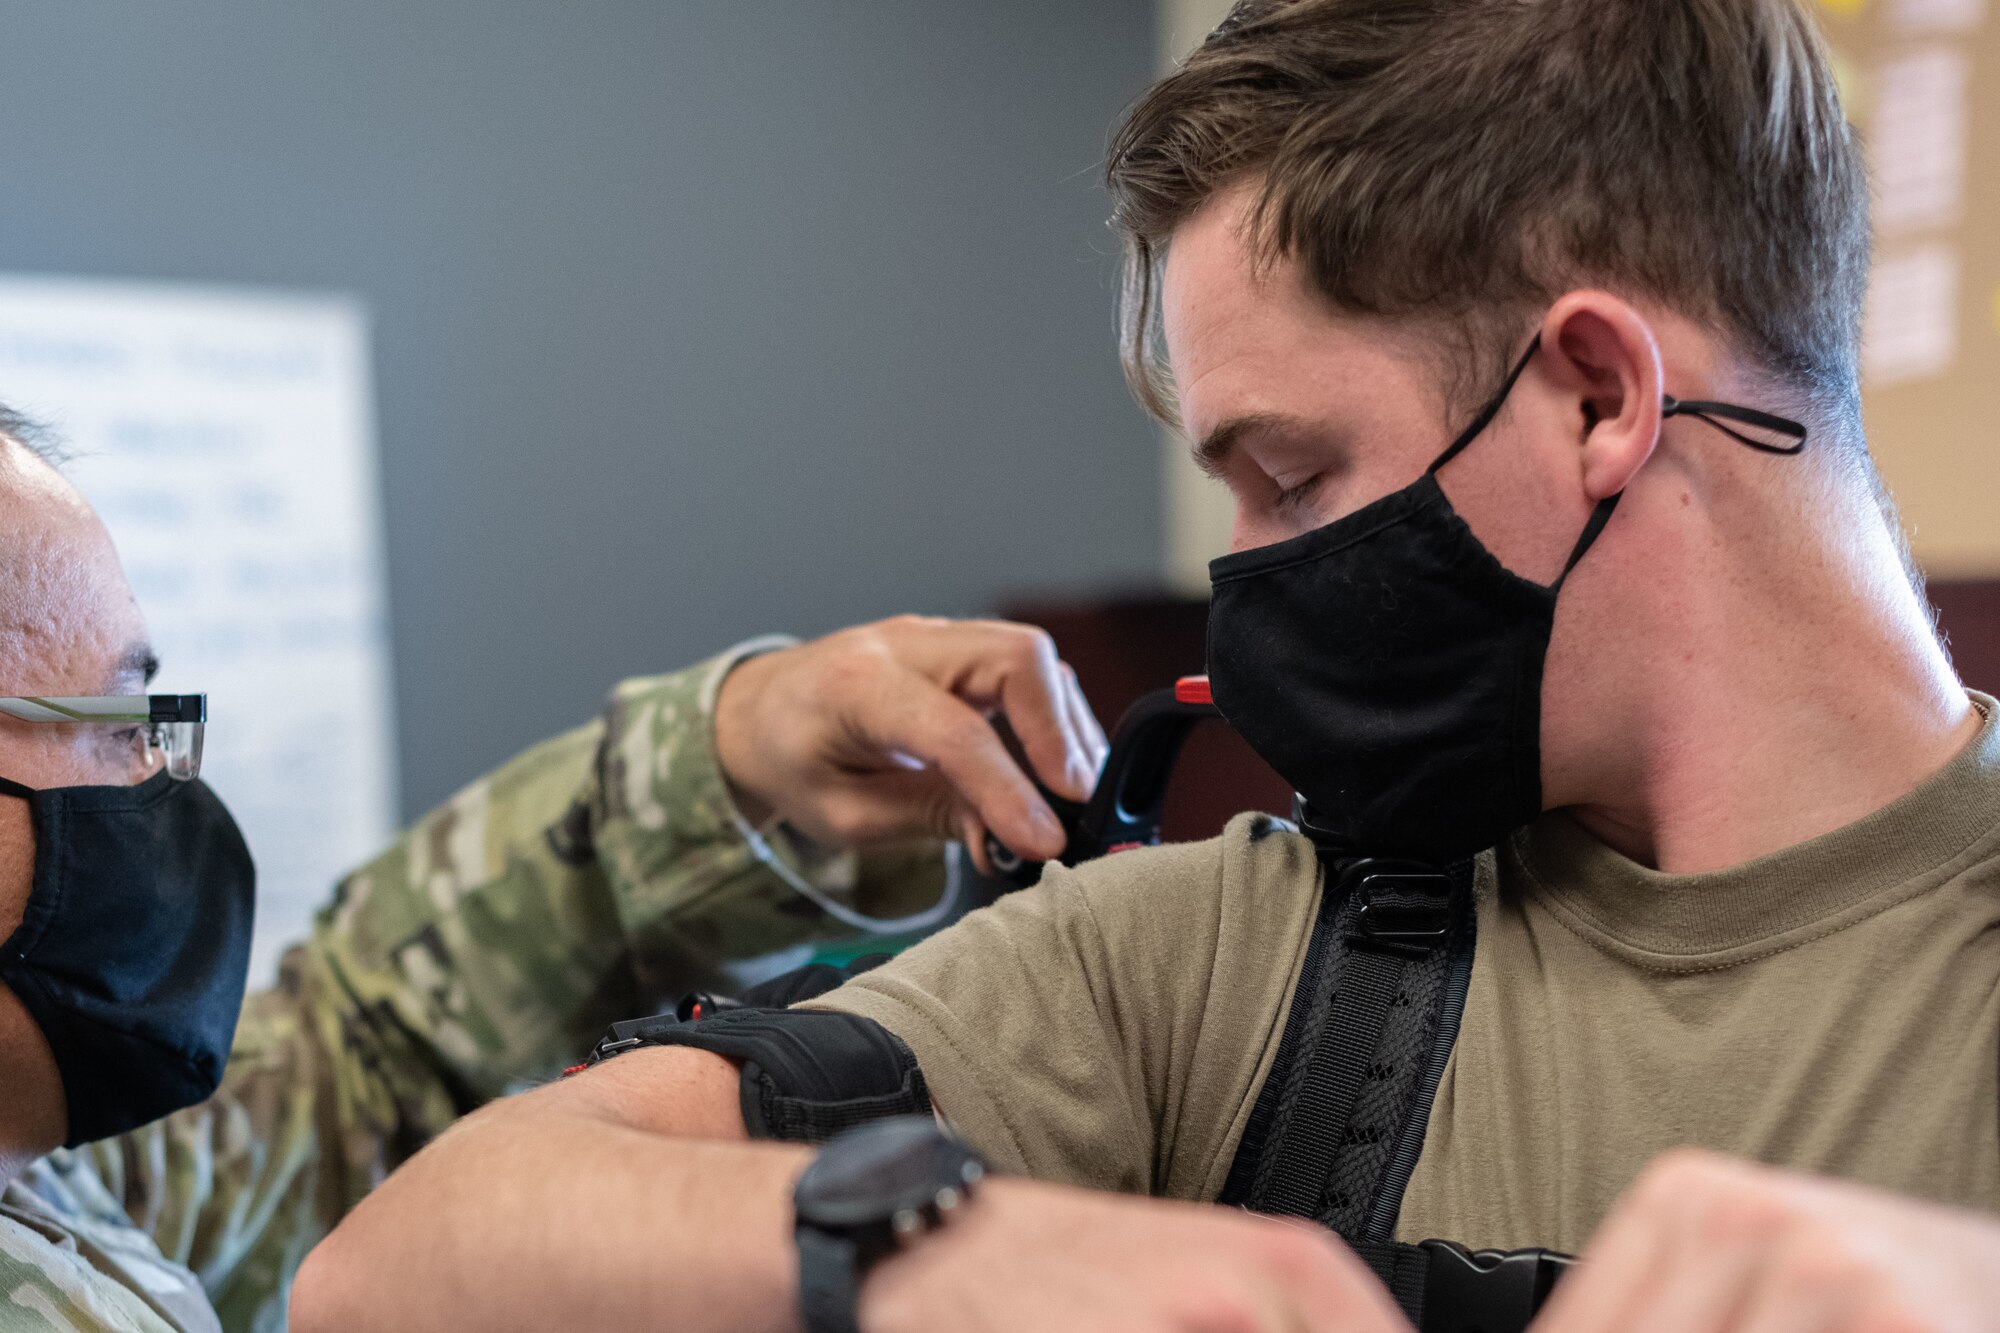 An Airman looks on as another Airman straps a suite to his shoulder and arms.